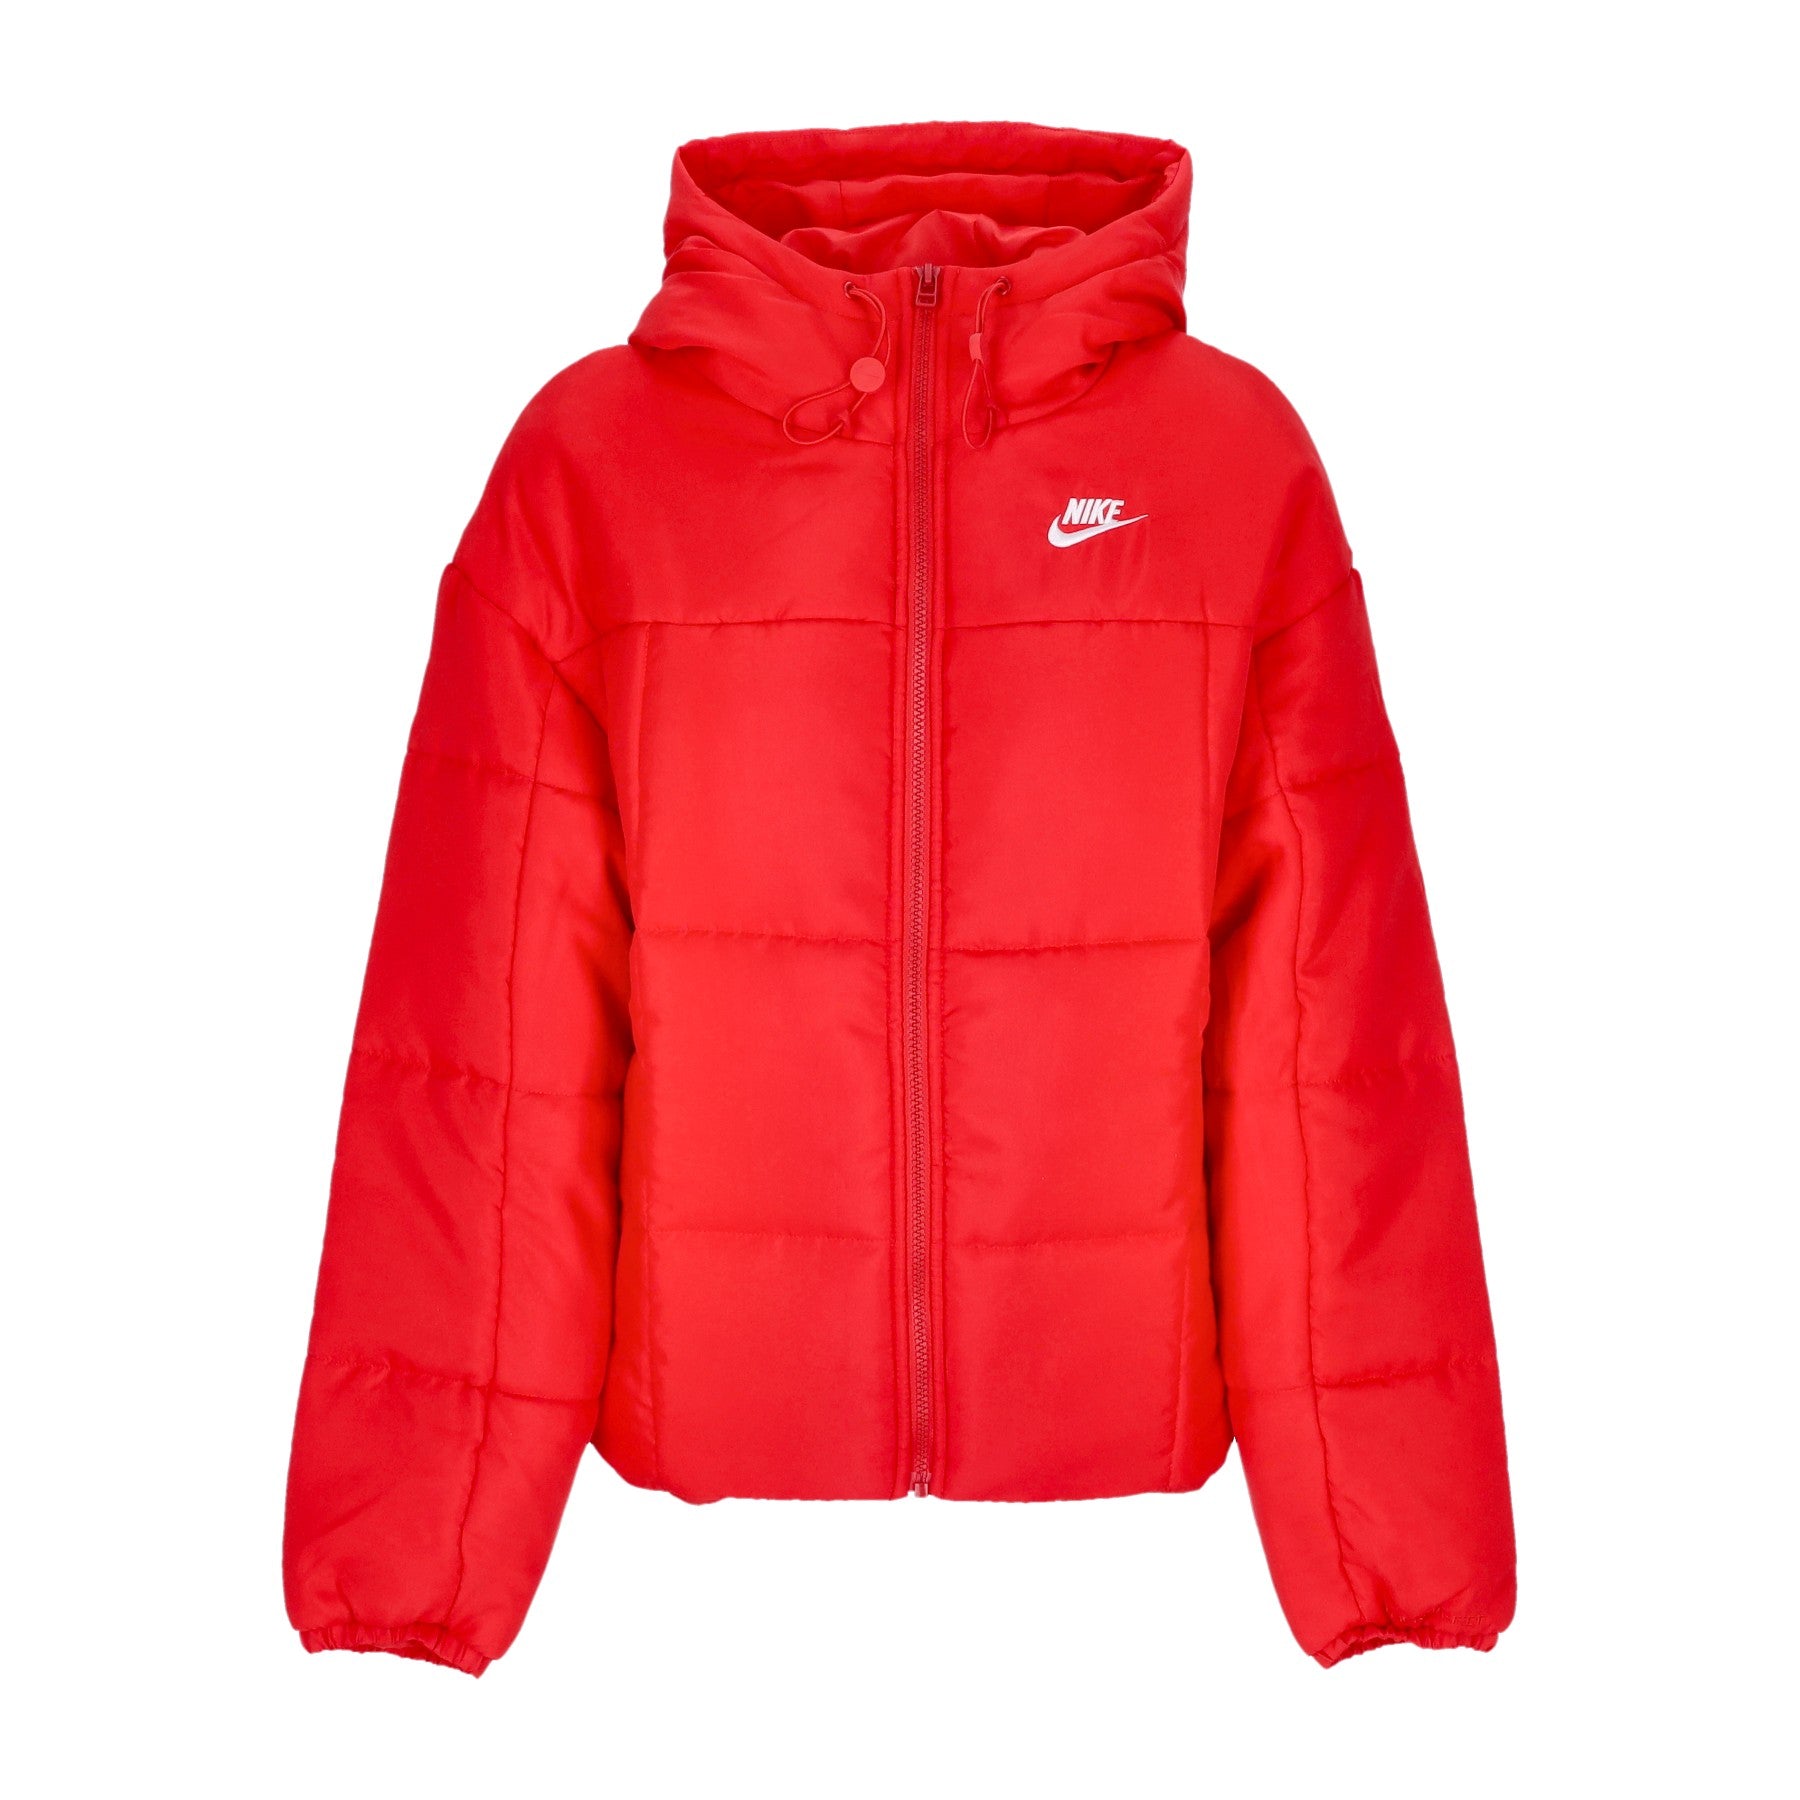 Nike, Piumino Donna W Essential Thermic Classic Puffer, University Red/white